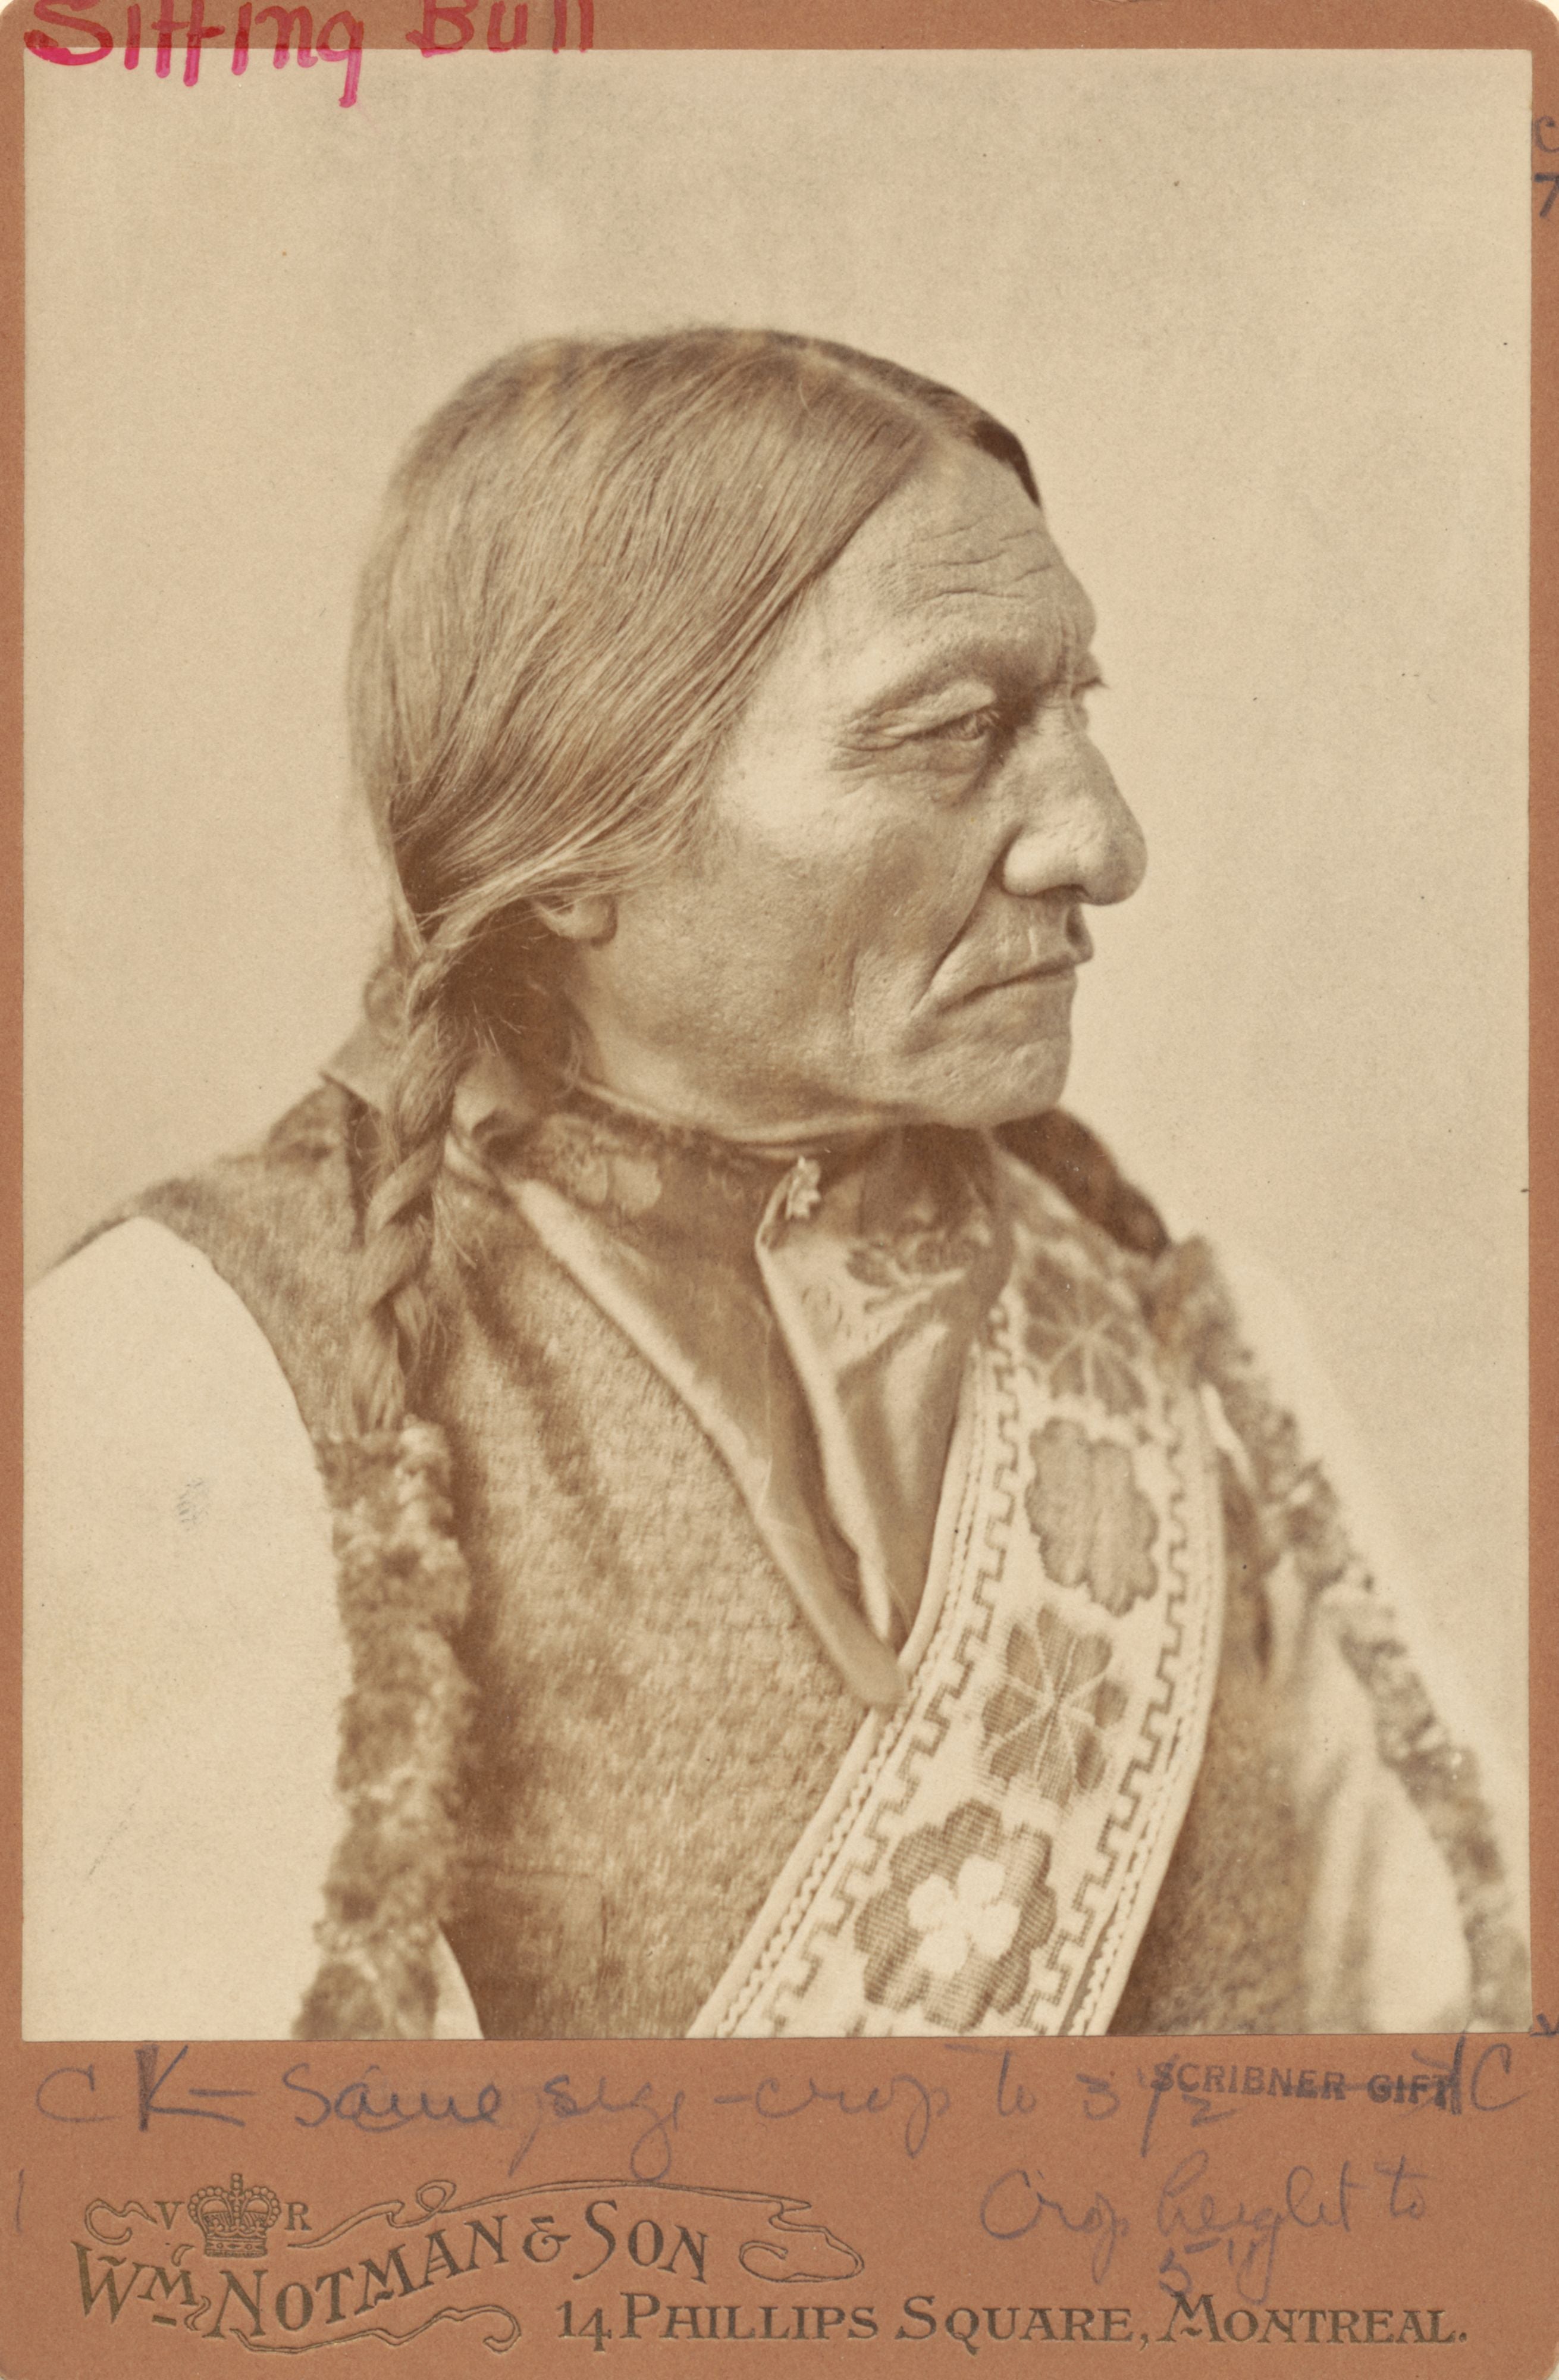 Native American leader Sitting Bull, who died in 1890, is seen in this picture from circa 1885